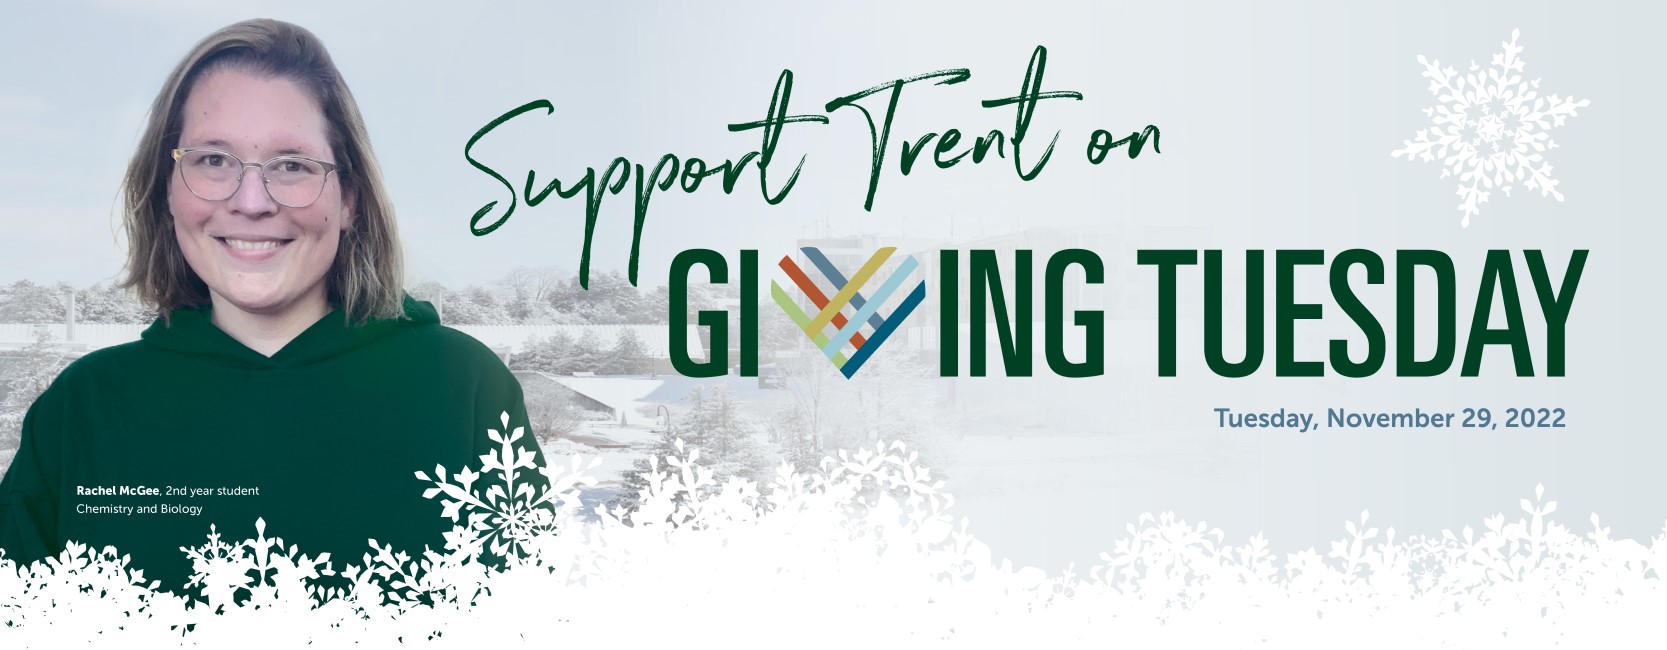 Giving Tuesday 2022 Banner Image